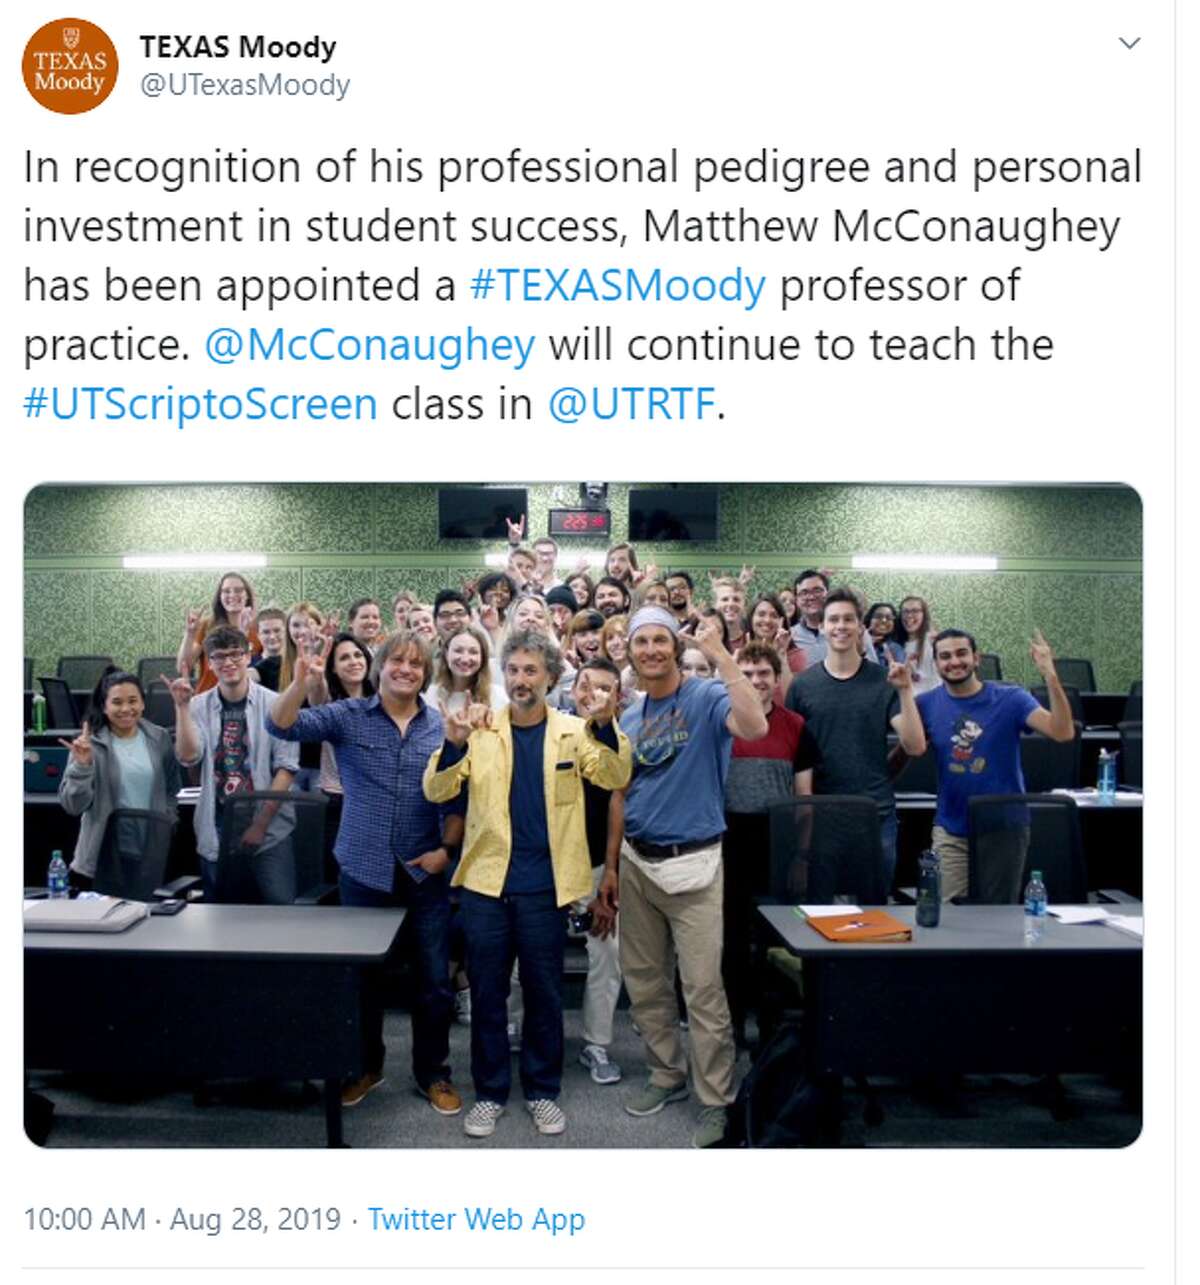 @UTexasMoody In recognition of his professional pedigree and personal investment in student success, Matthew McConaughey has been appointed a #TEXASMoody professor of practice. @McConaughey will continue to teach the #UTScriptoScreen class in @UTRTF.